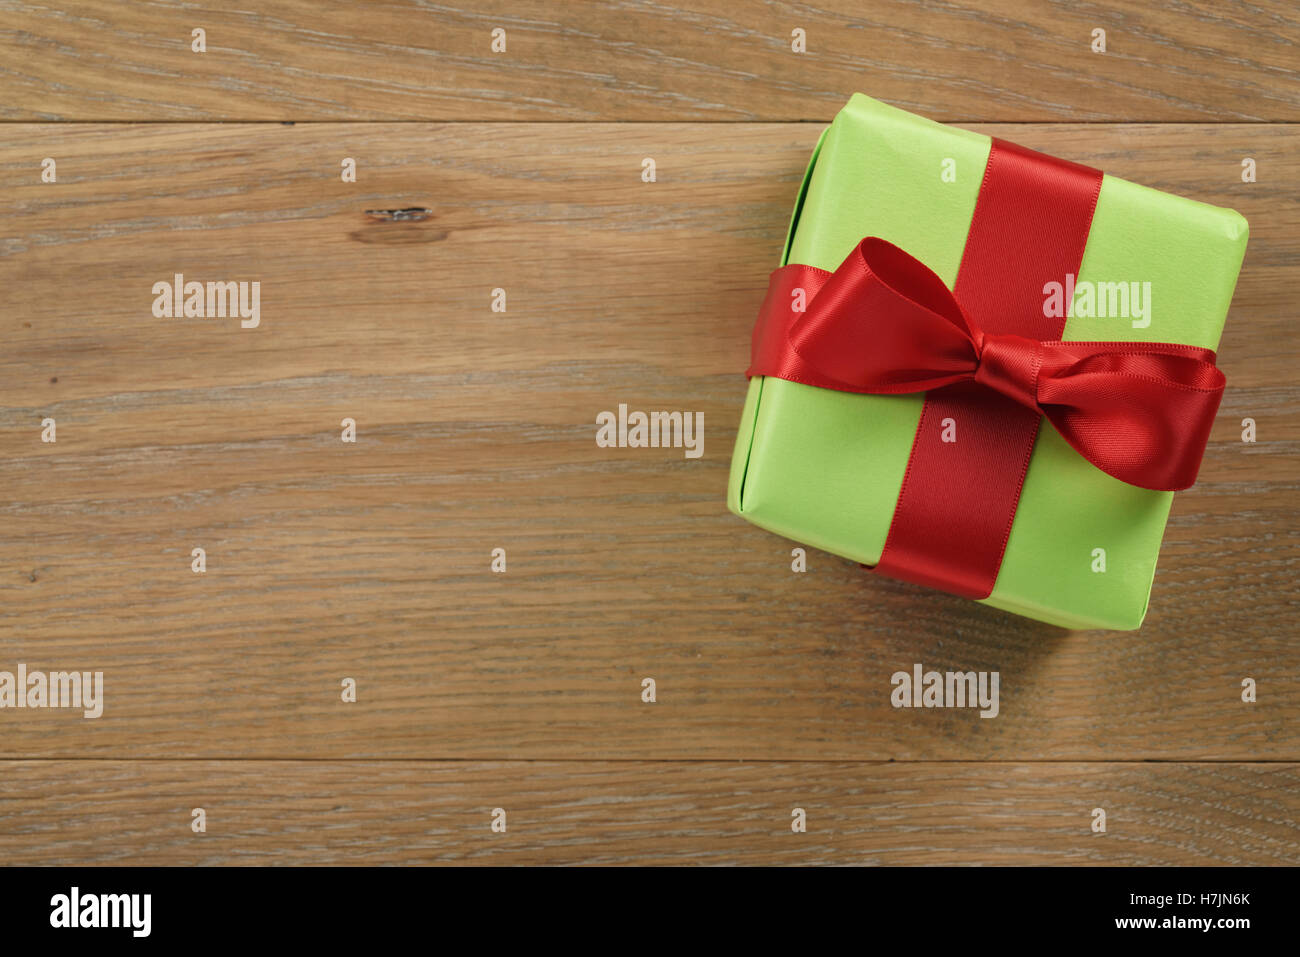 green gift box with red ribbon bow on wooden oak table from above Stock Photo